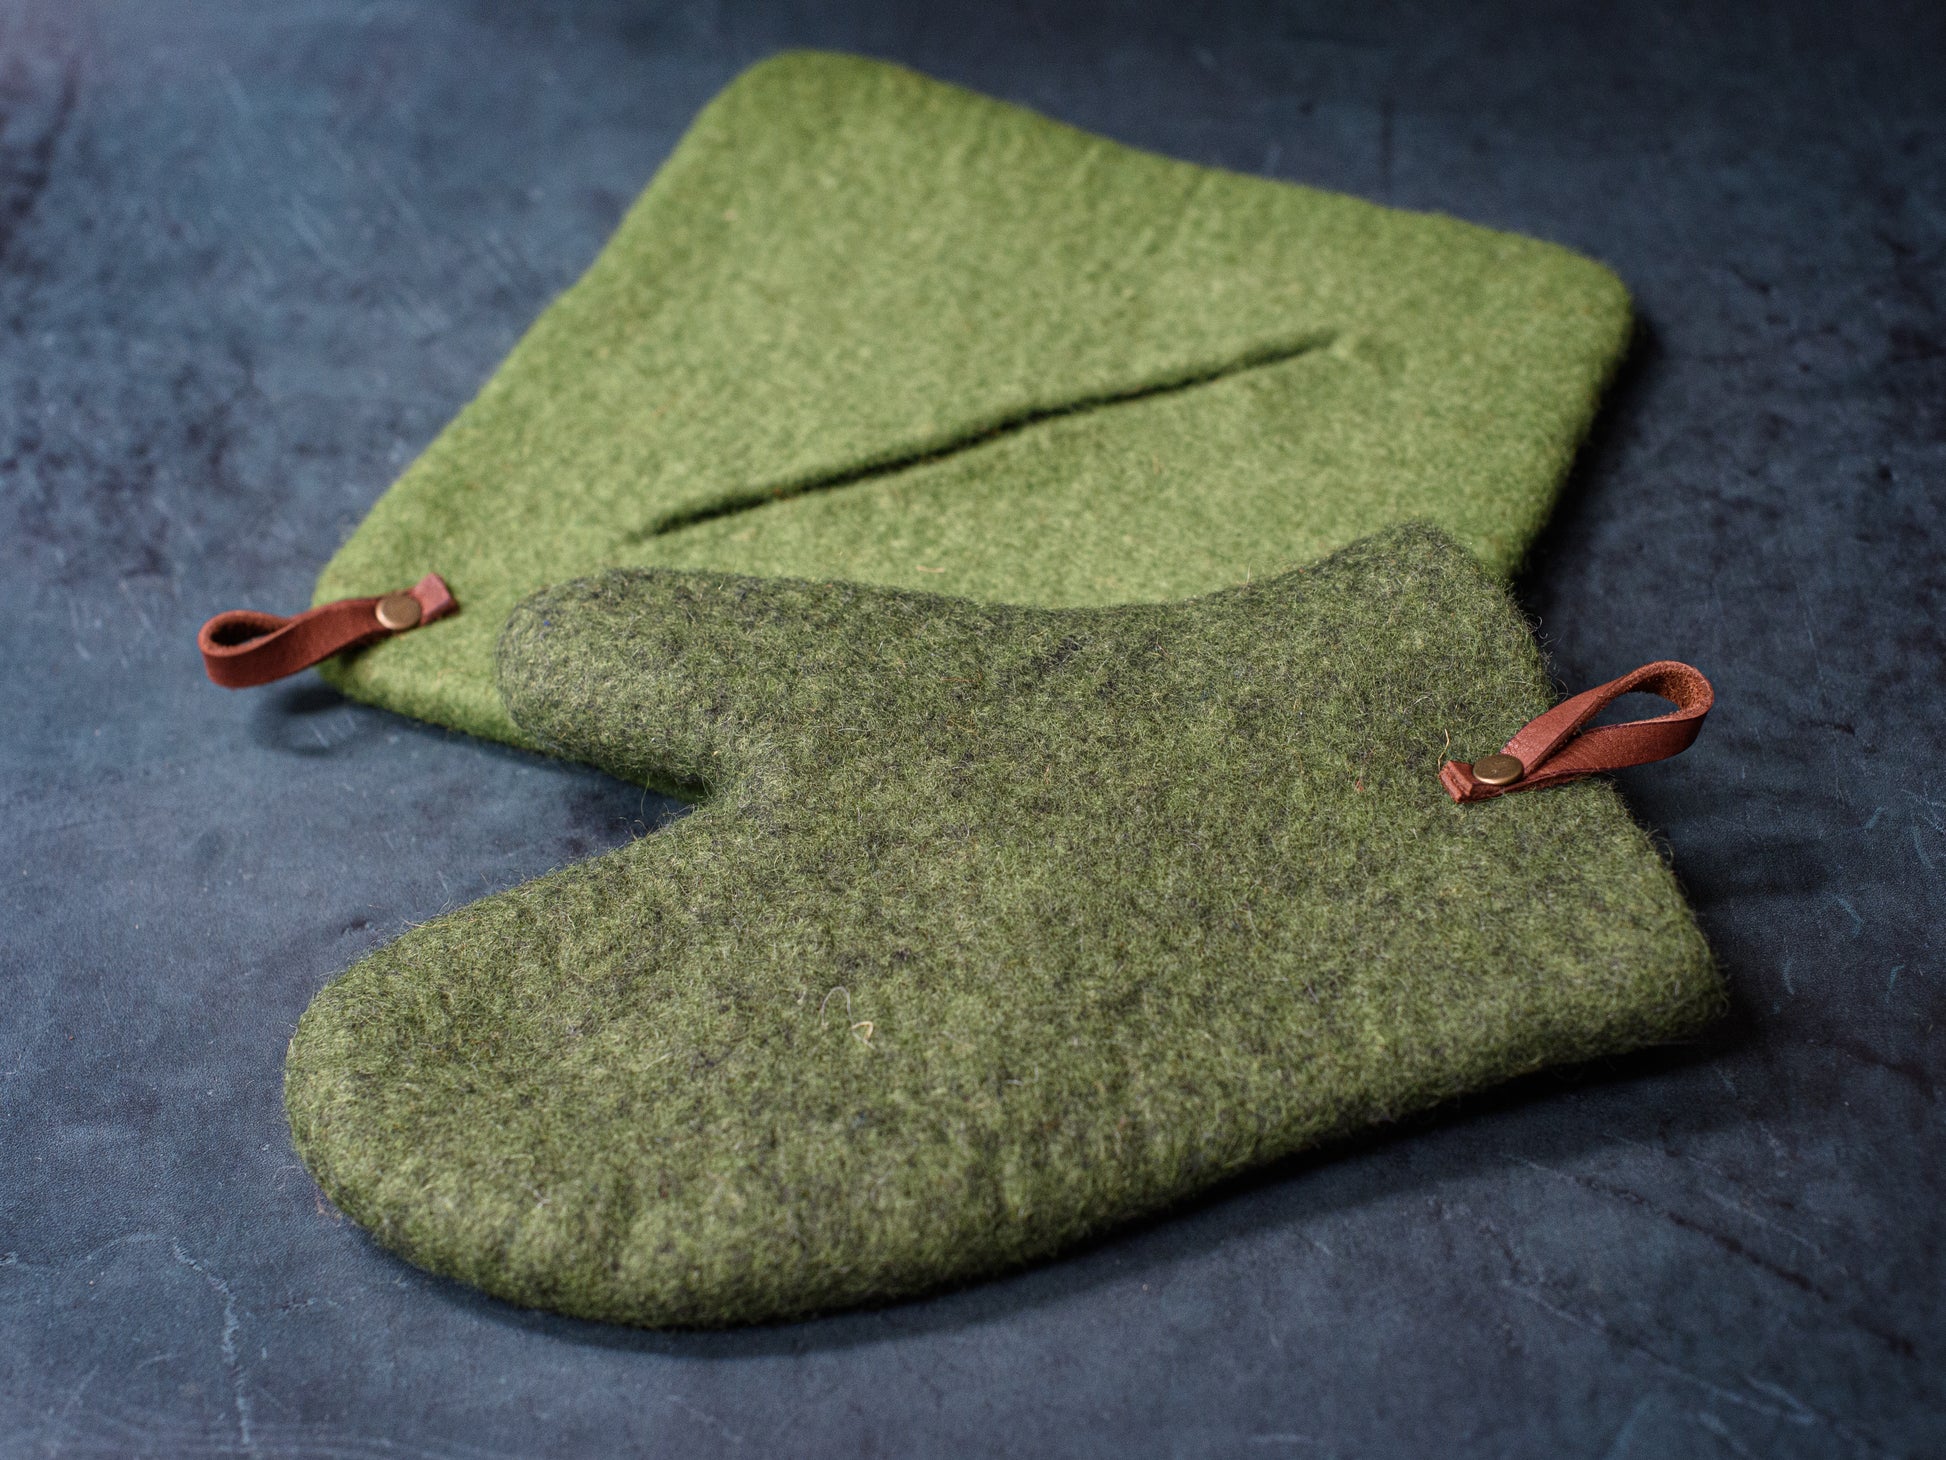 Felted wool oven mittens and pot holder set – BureBure shoes and slippers